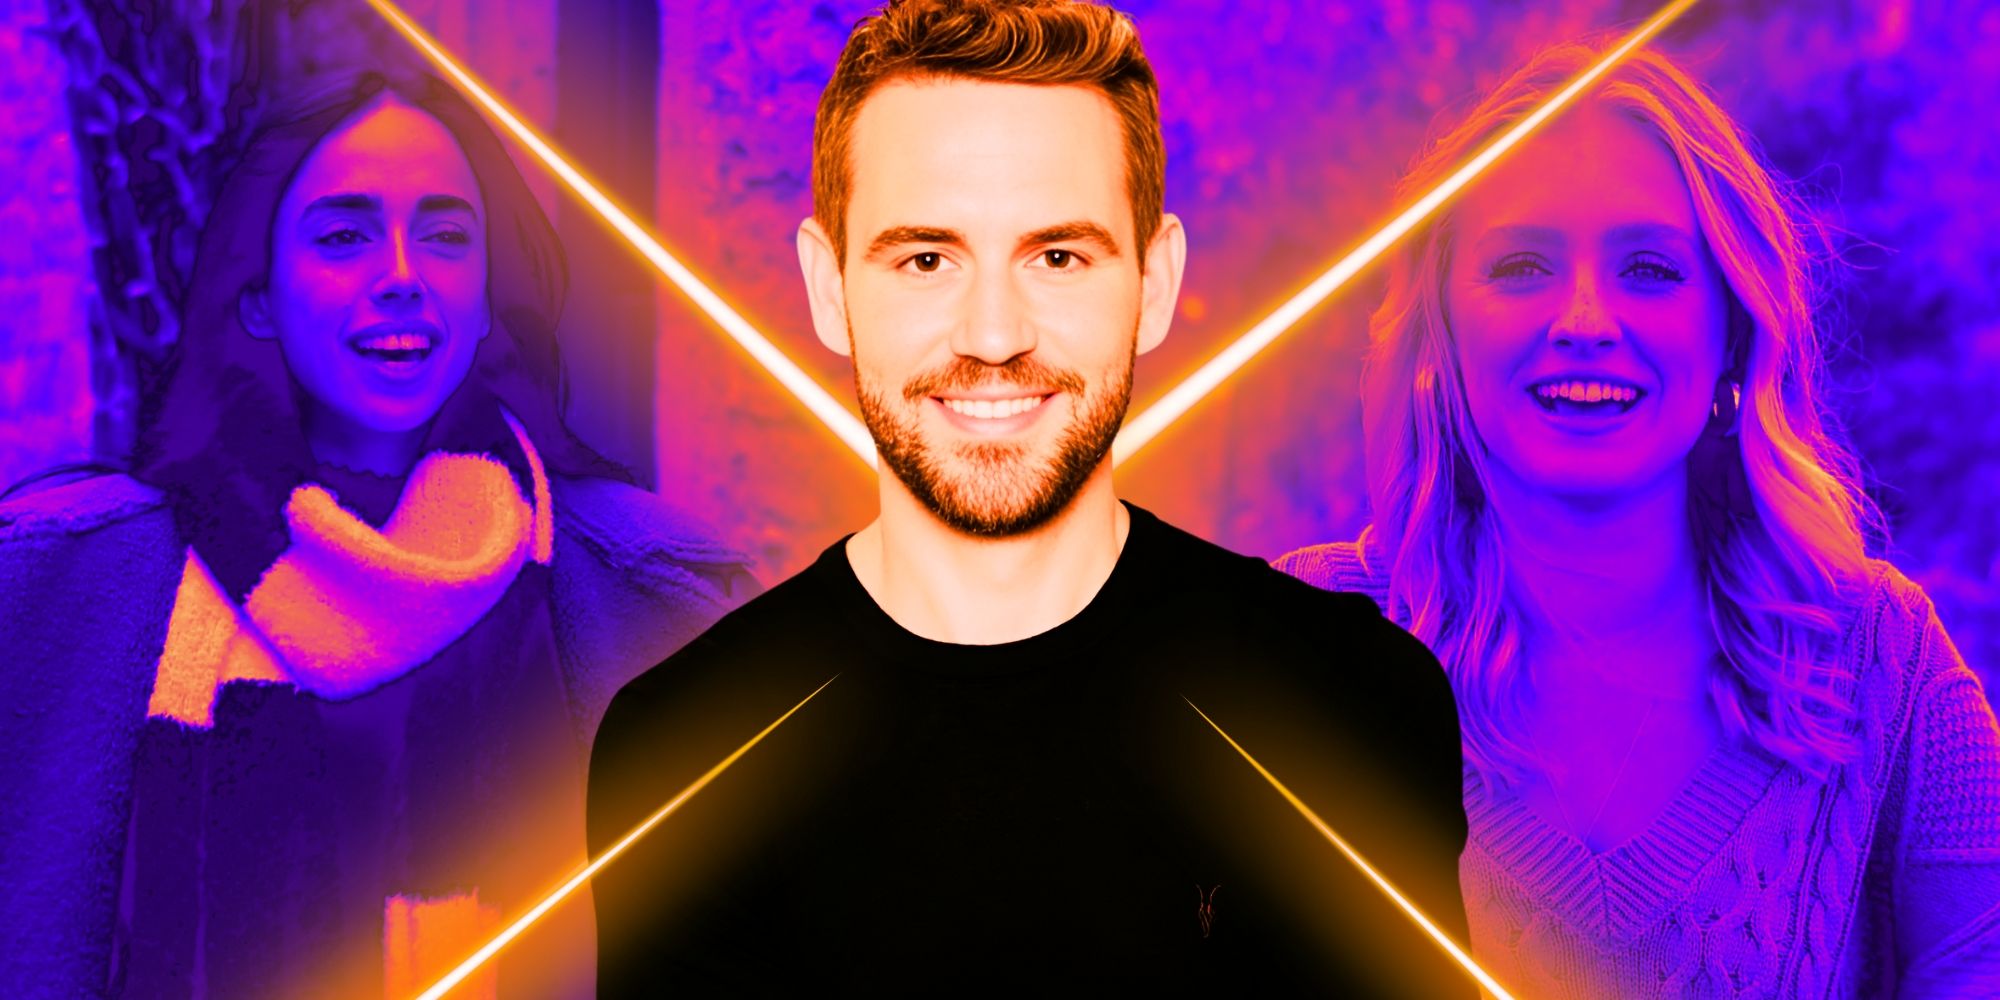 Nick Viall smiling, flanked by The Bachelor's Maria Georgas and Daisy Kent, with purple background